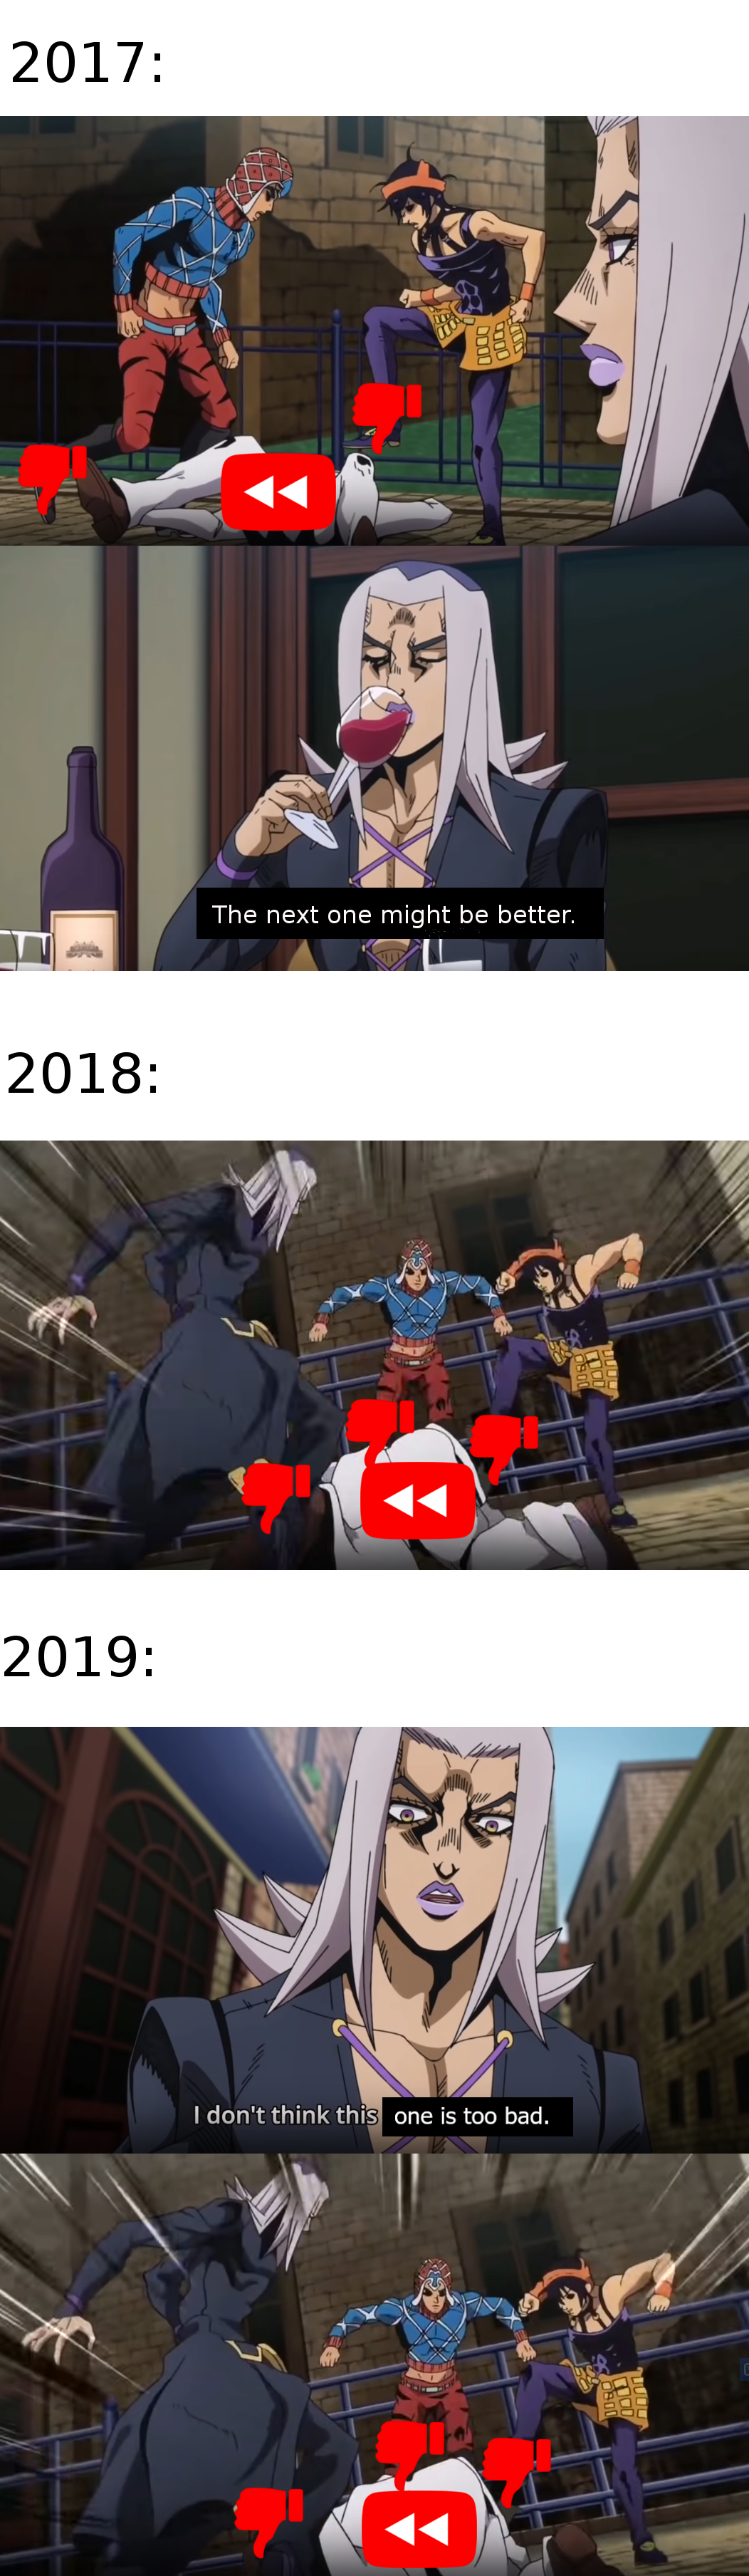 The new rewind is just boring and not memeable like the last one